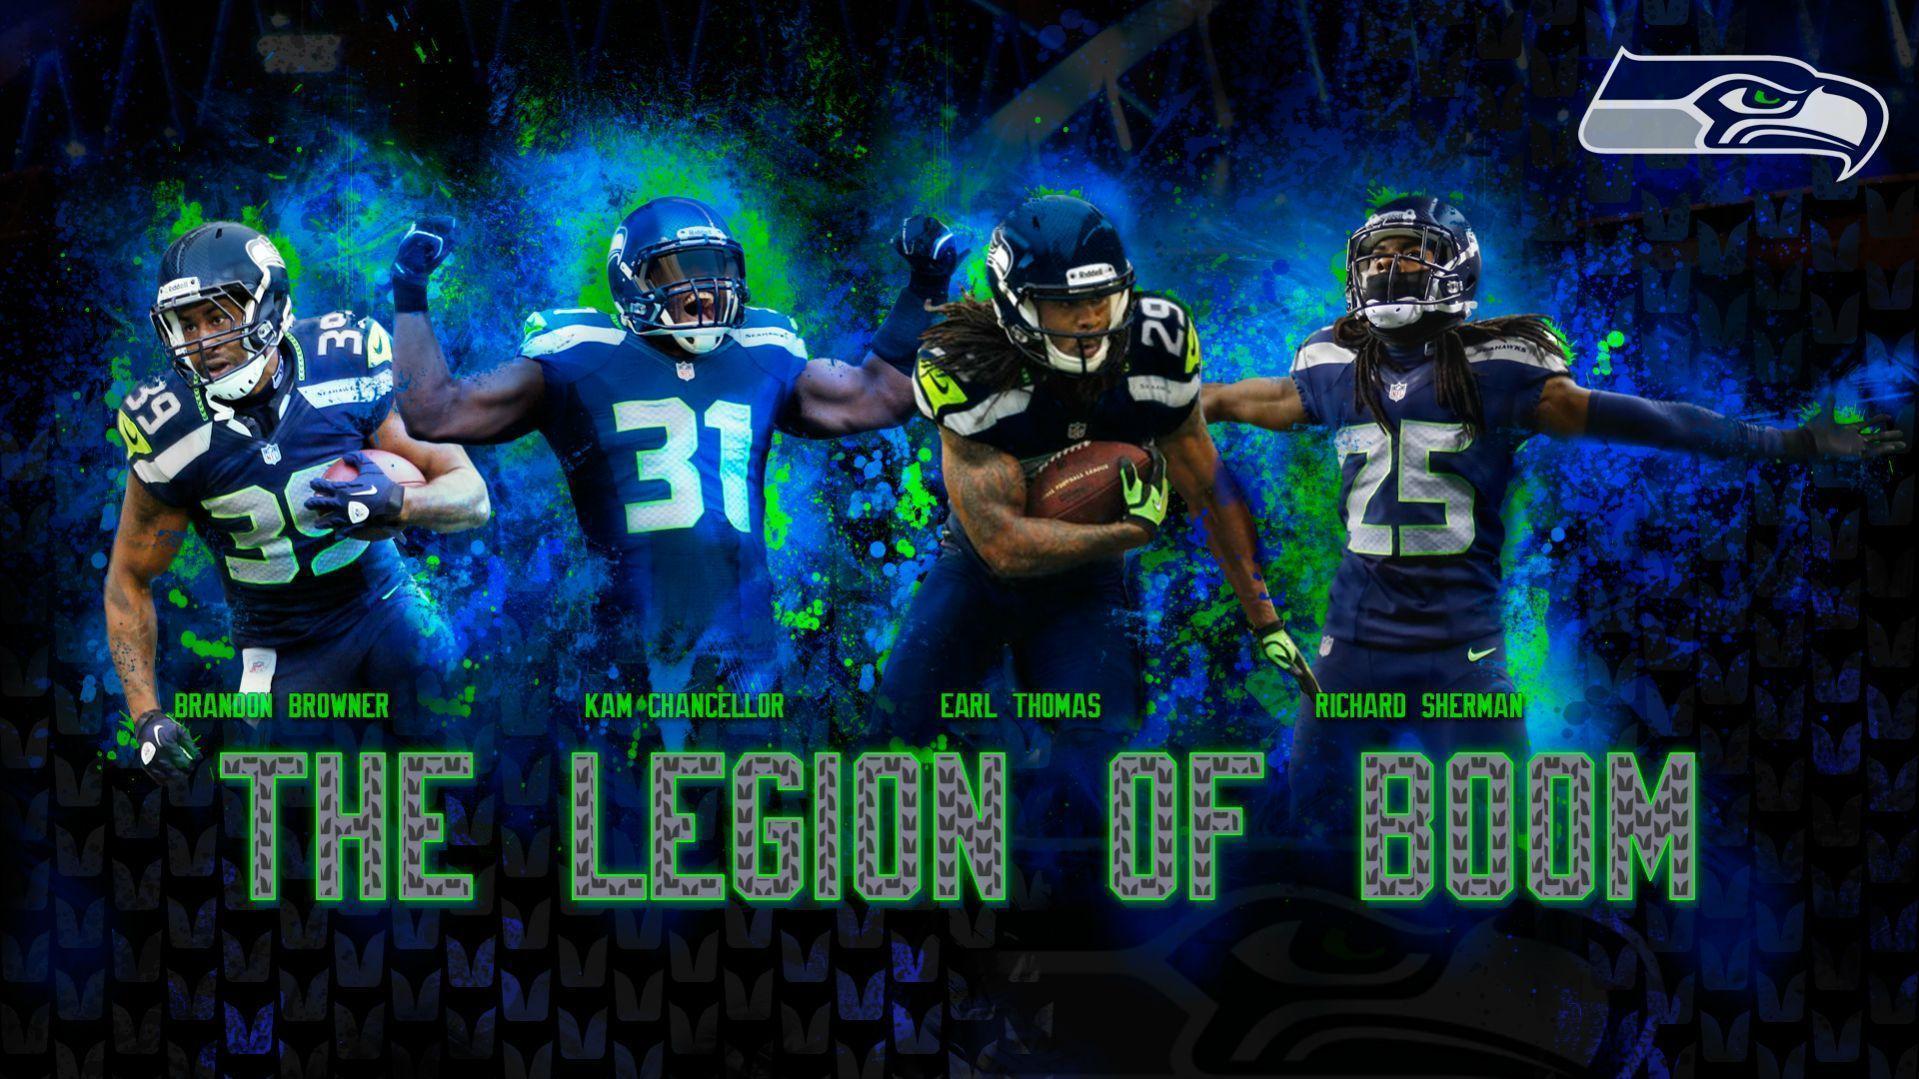 Collection of Seahawks Wallpaper, Seahawks. Football